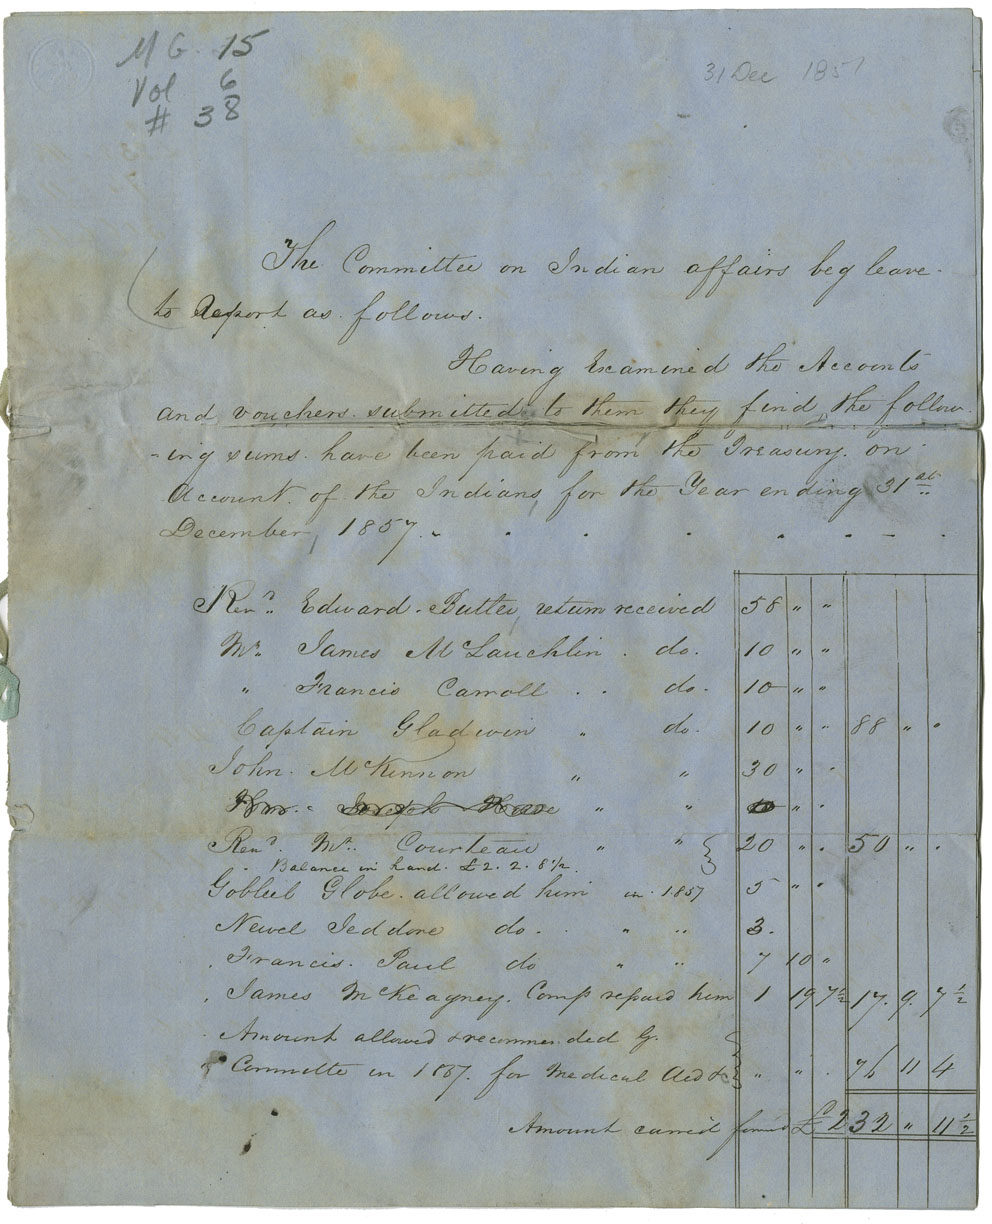 Report of a Committee on Indian Affairs with accounts.